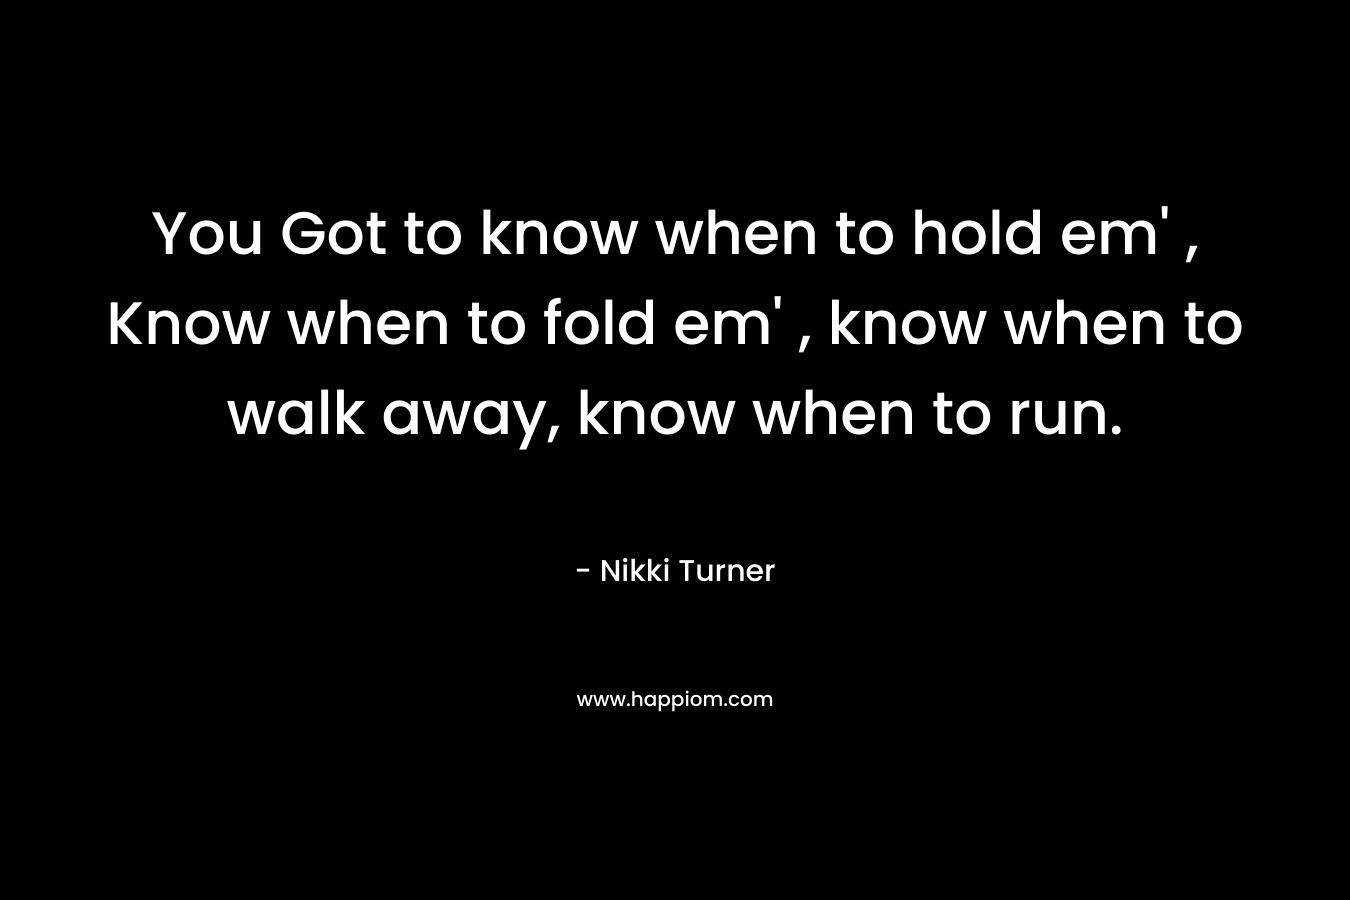  You Got to know when to hold em' , Know when to fold em' , know when to walk away, know when to run. 